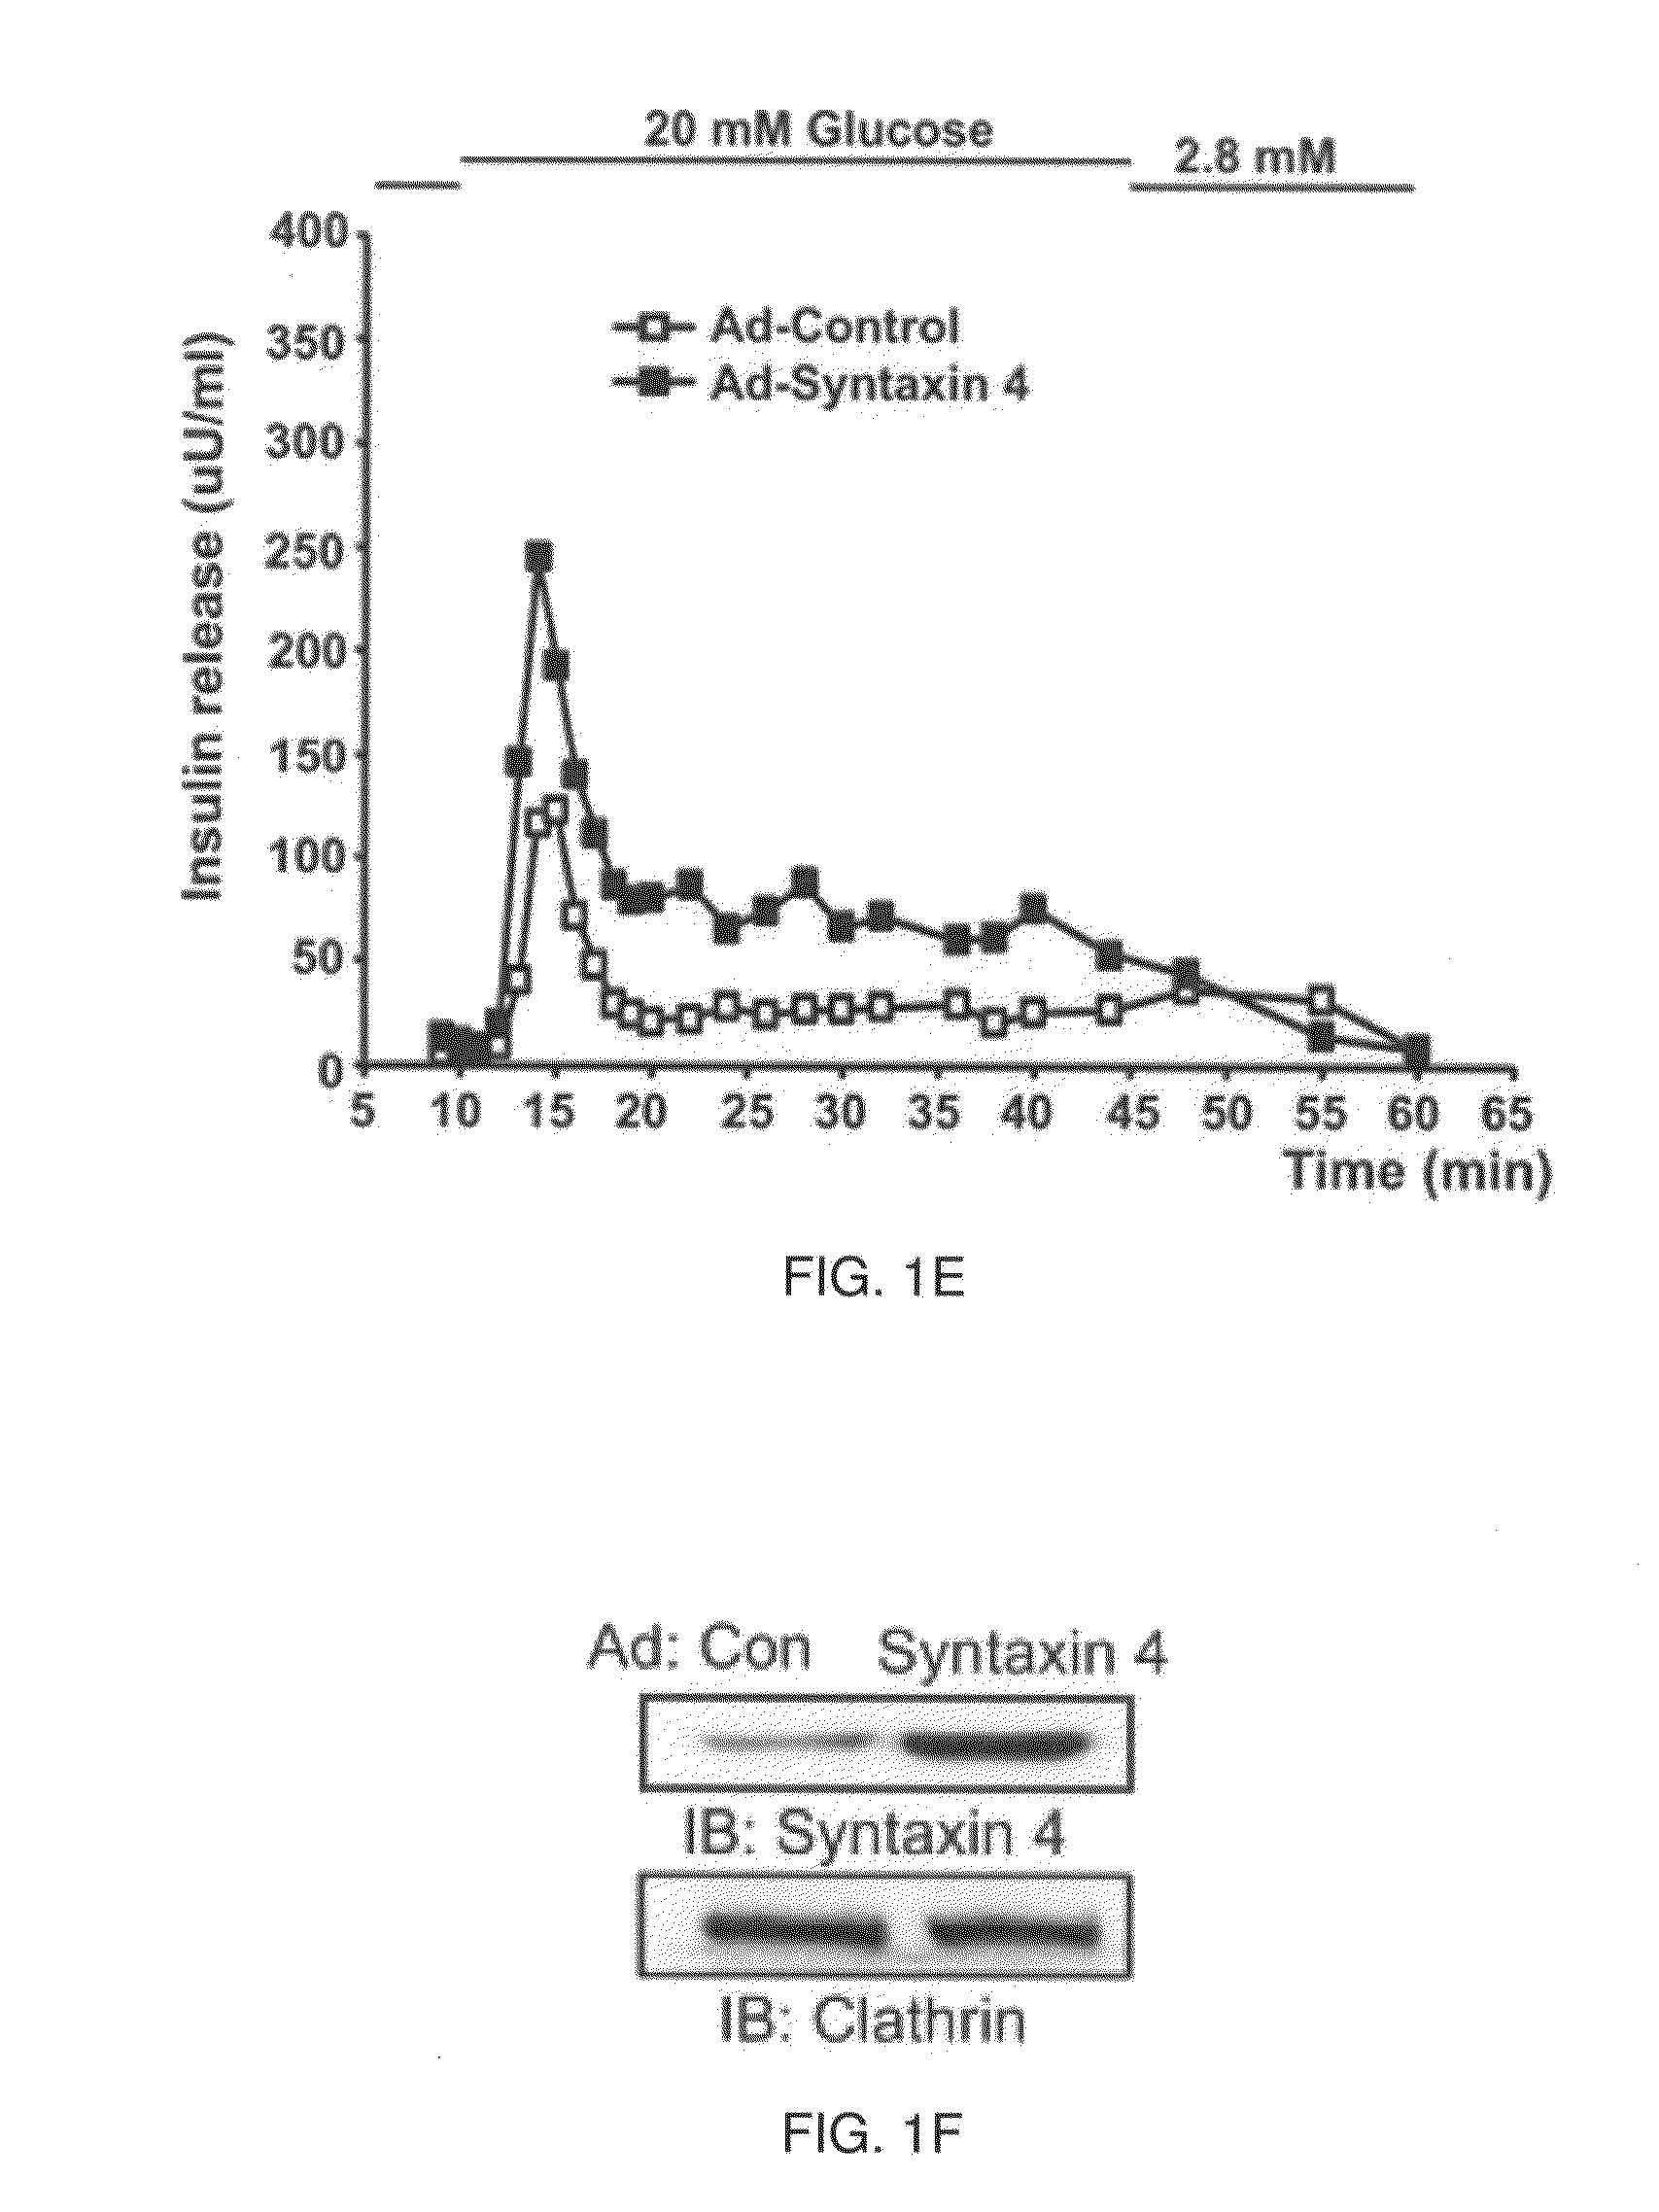 Materials and Methods for Regulating Whole Body Glucose Homeostasis